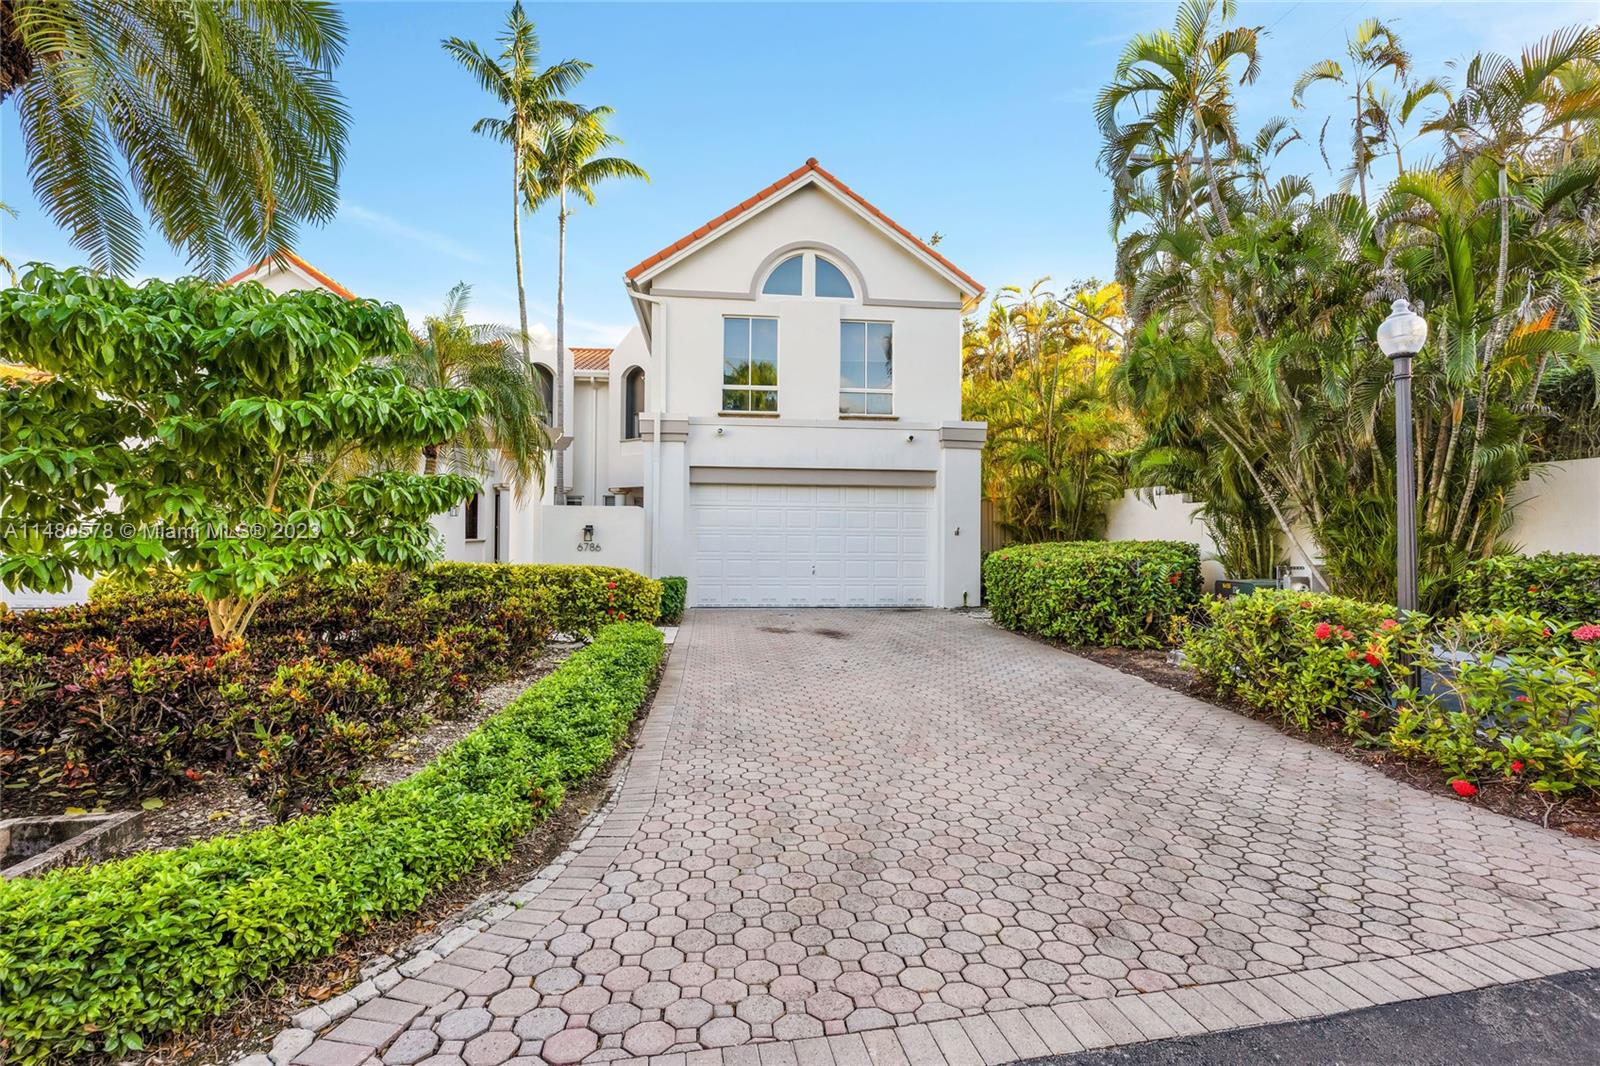 Located in the heart of Pinecrest in guard-gated Swan Lake, you will find this 4 bedroom, 2.5 bathroom, 3,336 square foot townhouse with a spacious 6,929 square foot lot!  This is an excellent opportunity to update the original, 1993-built corner unit that features gracious living areas including formal dining room, casual bar or eat-in area, and large living room/family room with double-height ceilings.  Upstairs, the vast primary suite features a spacious bedroom, bathroom with separate tub and shower, and dual vanities, plus two additional bedrooms, one with vaulted ceilings, share a bathroom.  With plenty of outdoor space, a 2 car garage, and close proximity to guest parking, the community pool and exercise room, this is a fabulous property to update and make your own!